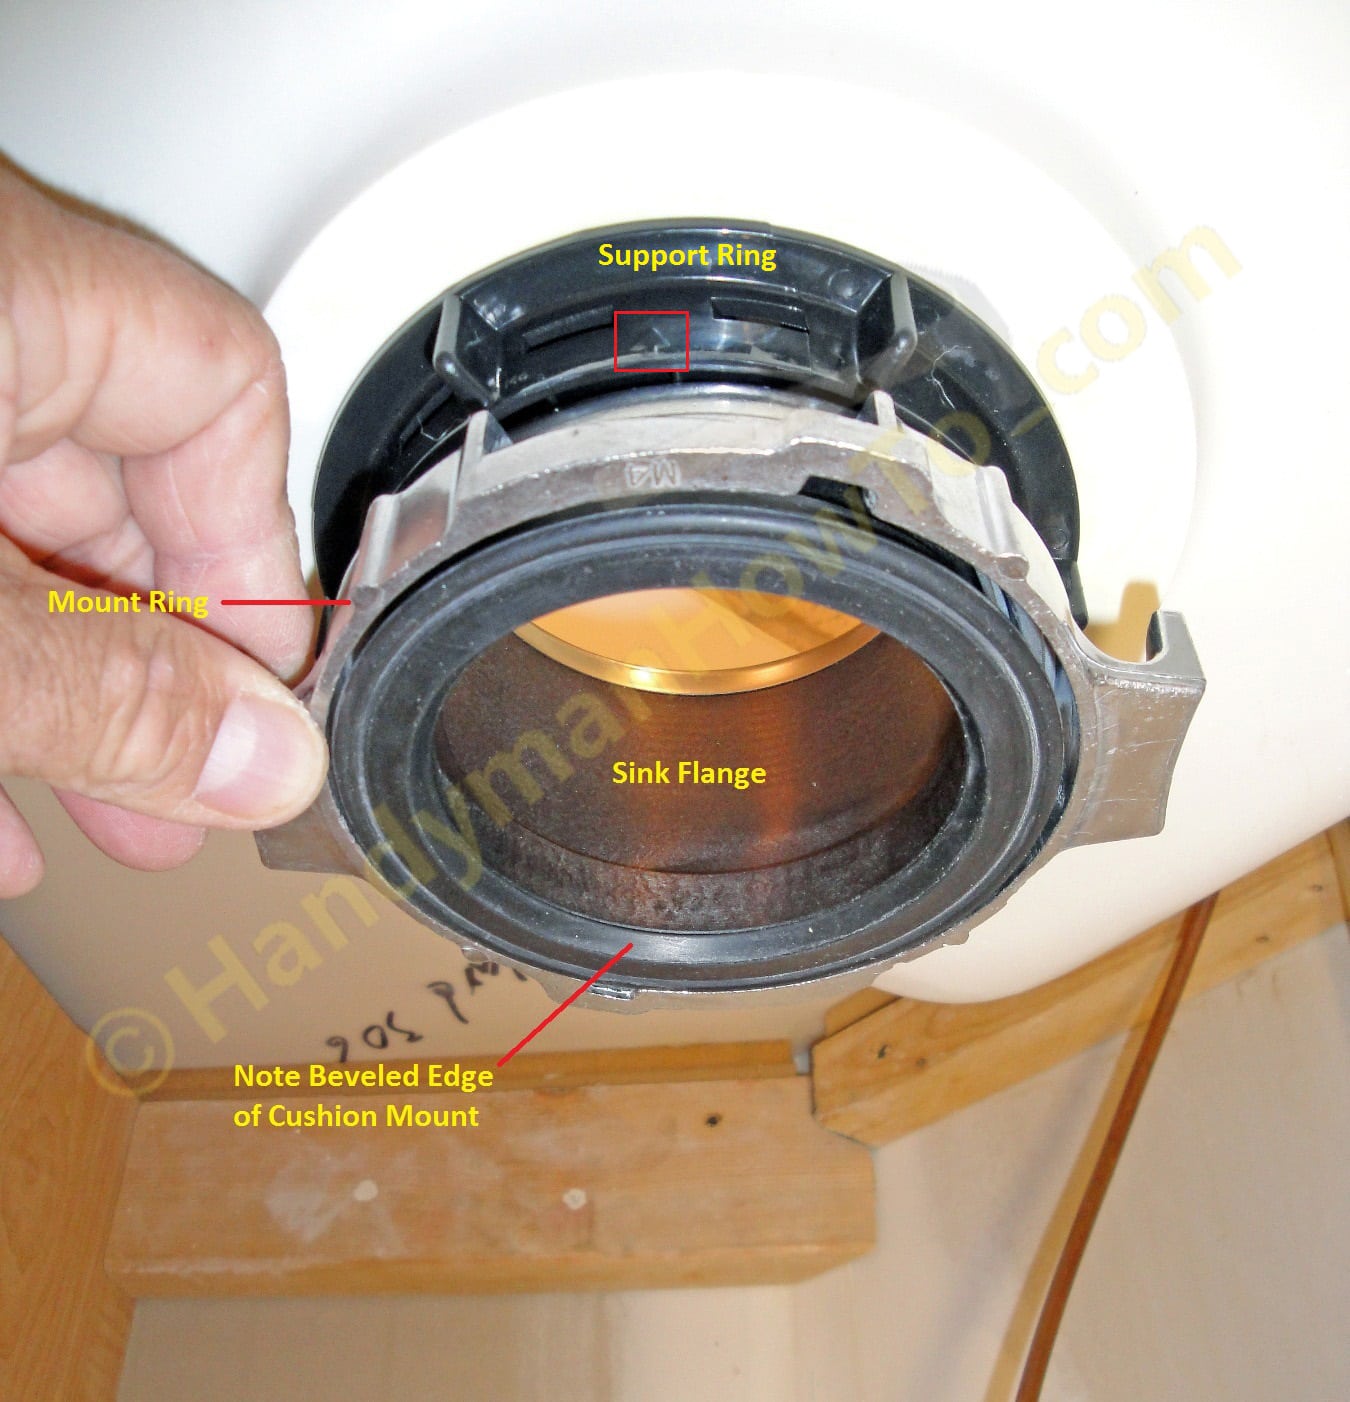 How To Replace A Garbage Disposal Part 3